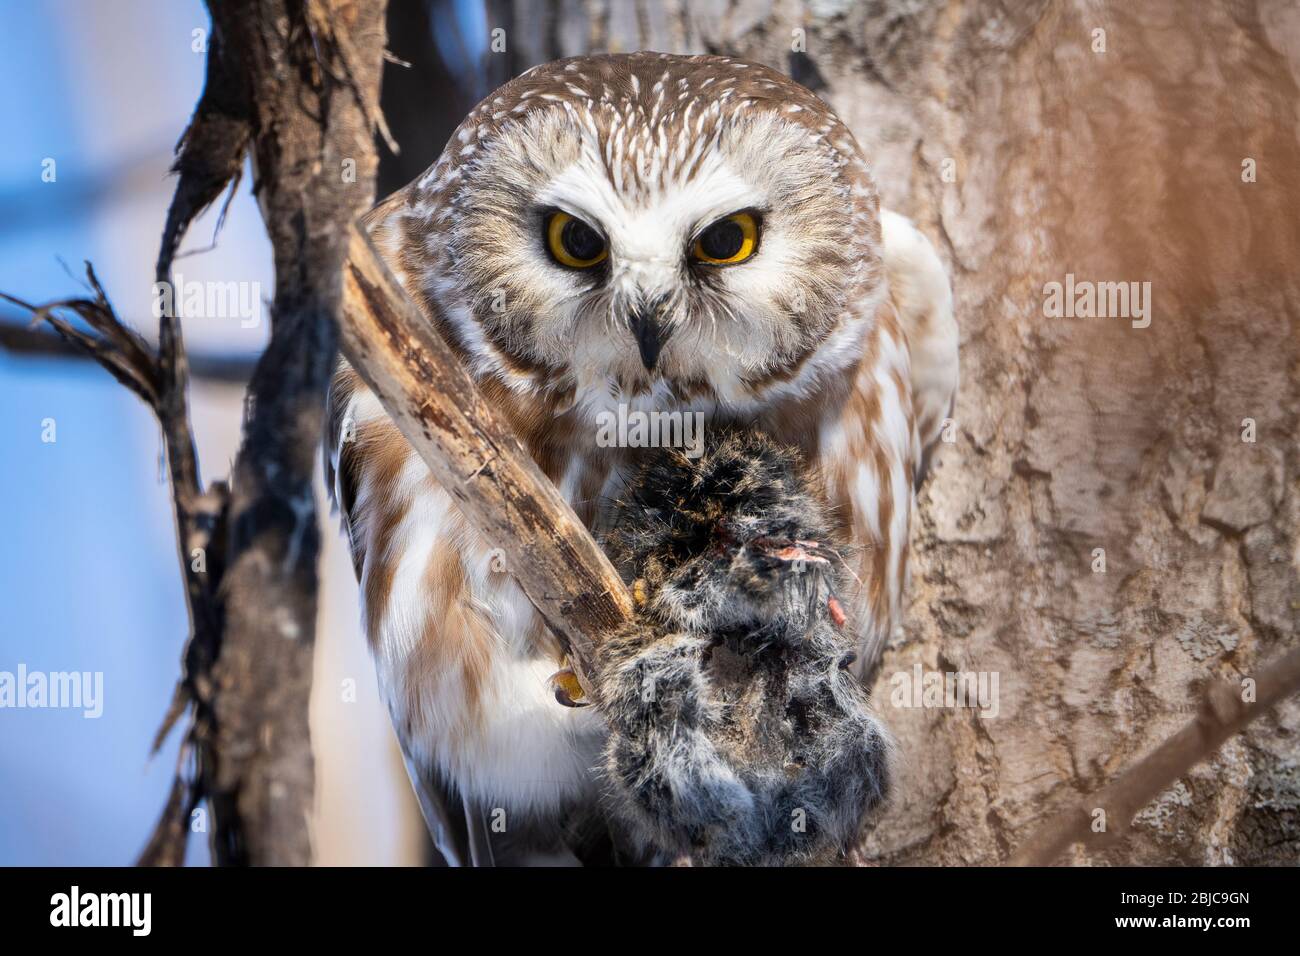 Northern Saw-whet Owl perched and eating its prey during a winter morning. Stock Photo